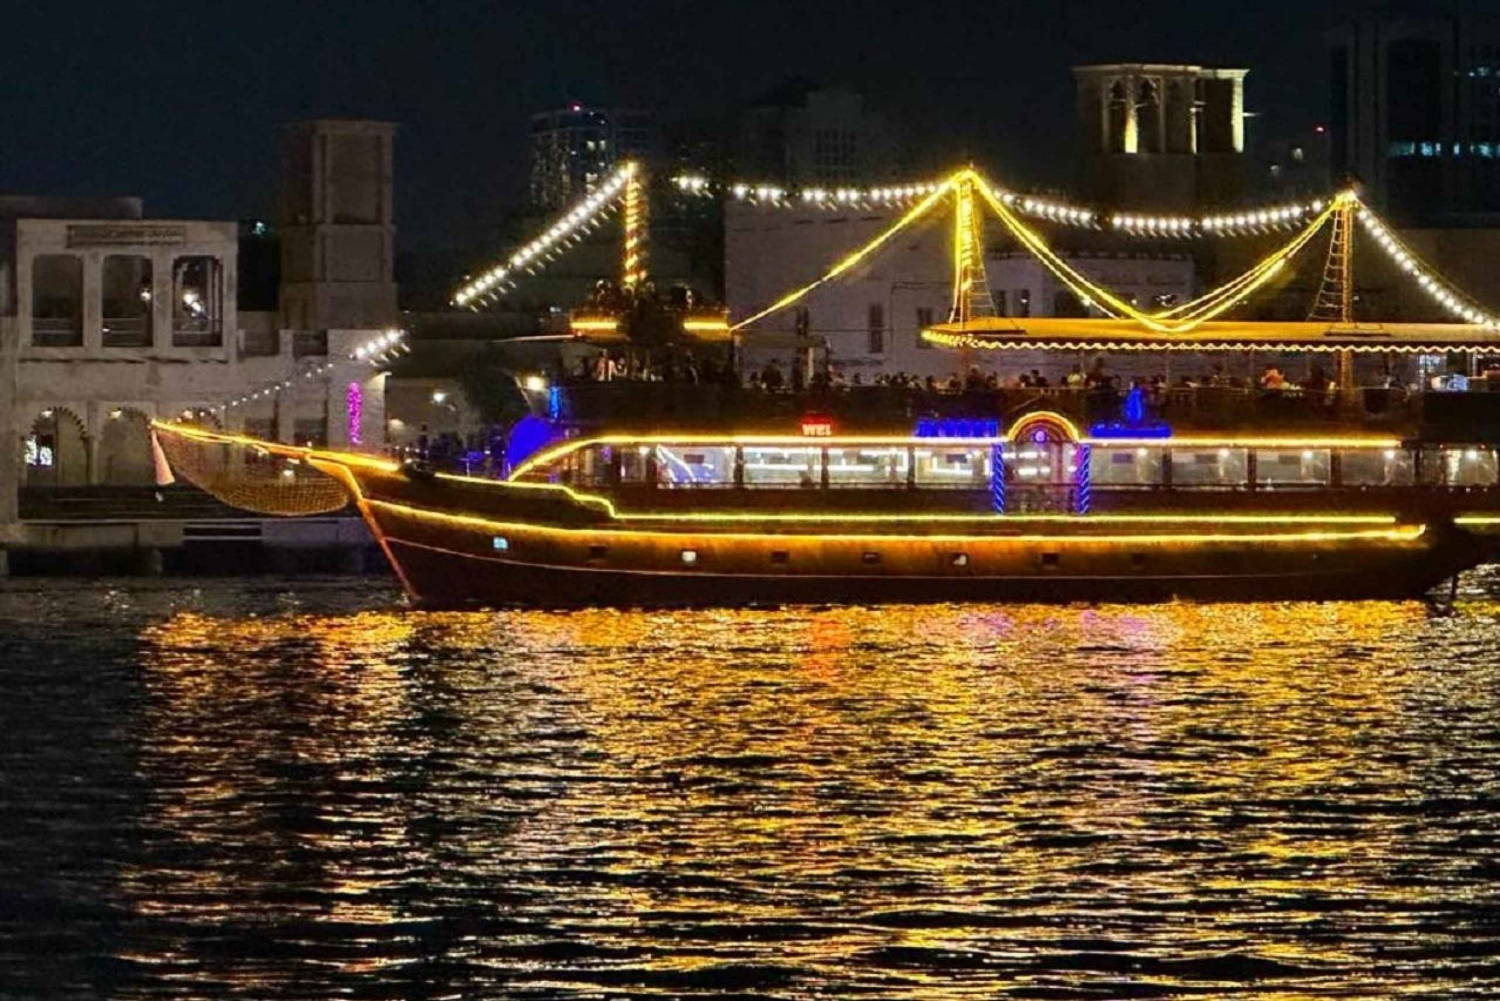 Dubai: Creek Traditional Dhow Cruise with Buffet Dinner: Creek Traditional Dhow Cruise with Buffet Dinner